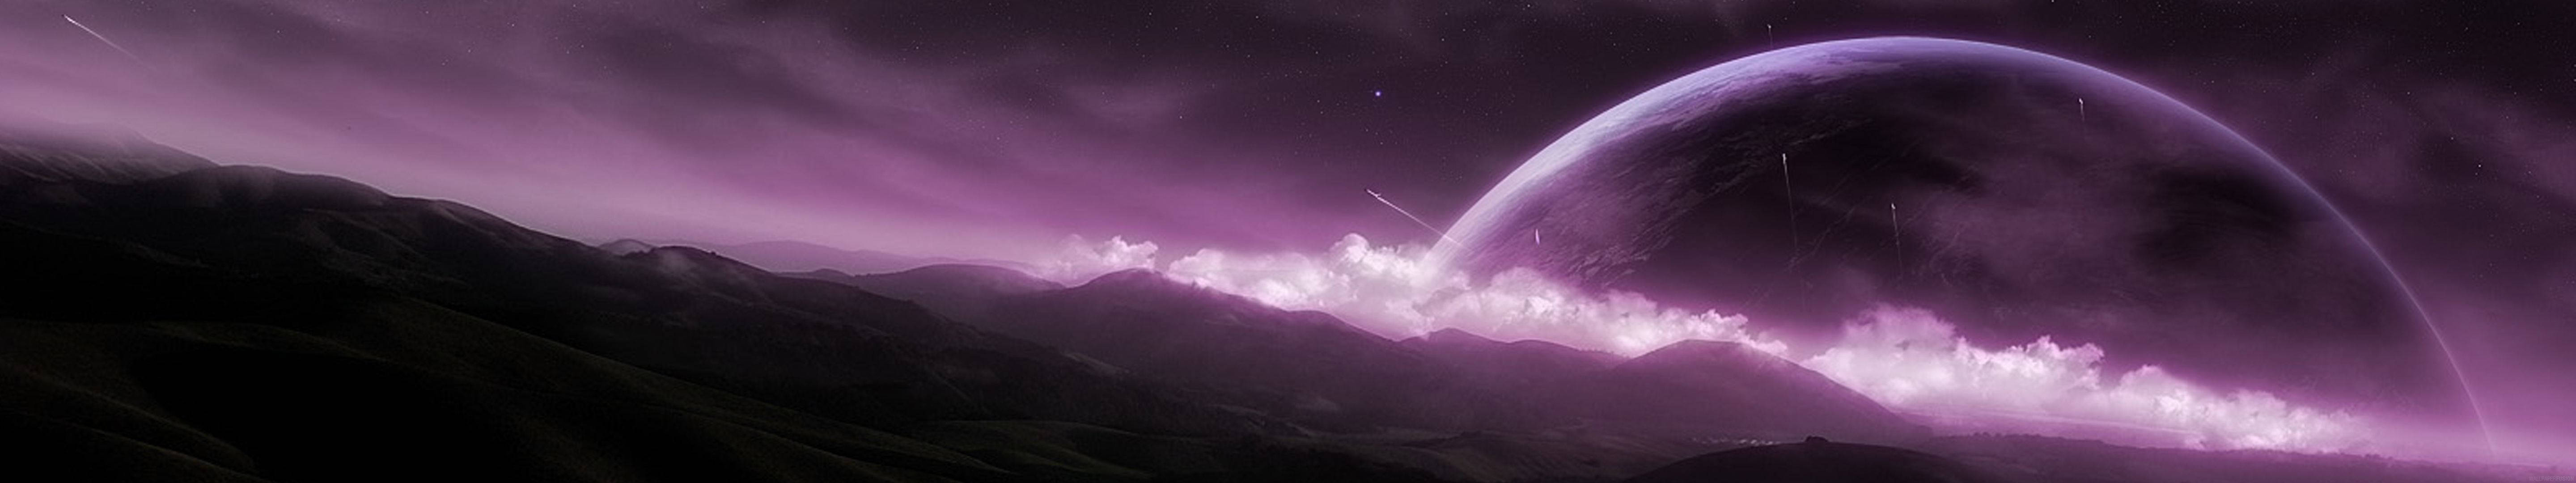 Giant Purple Earth Over Mountains Wallpaper